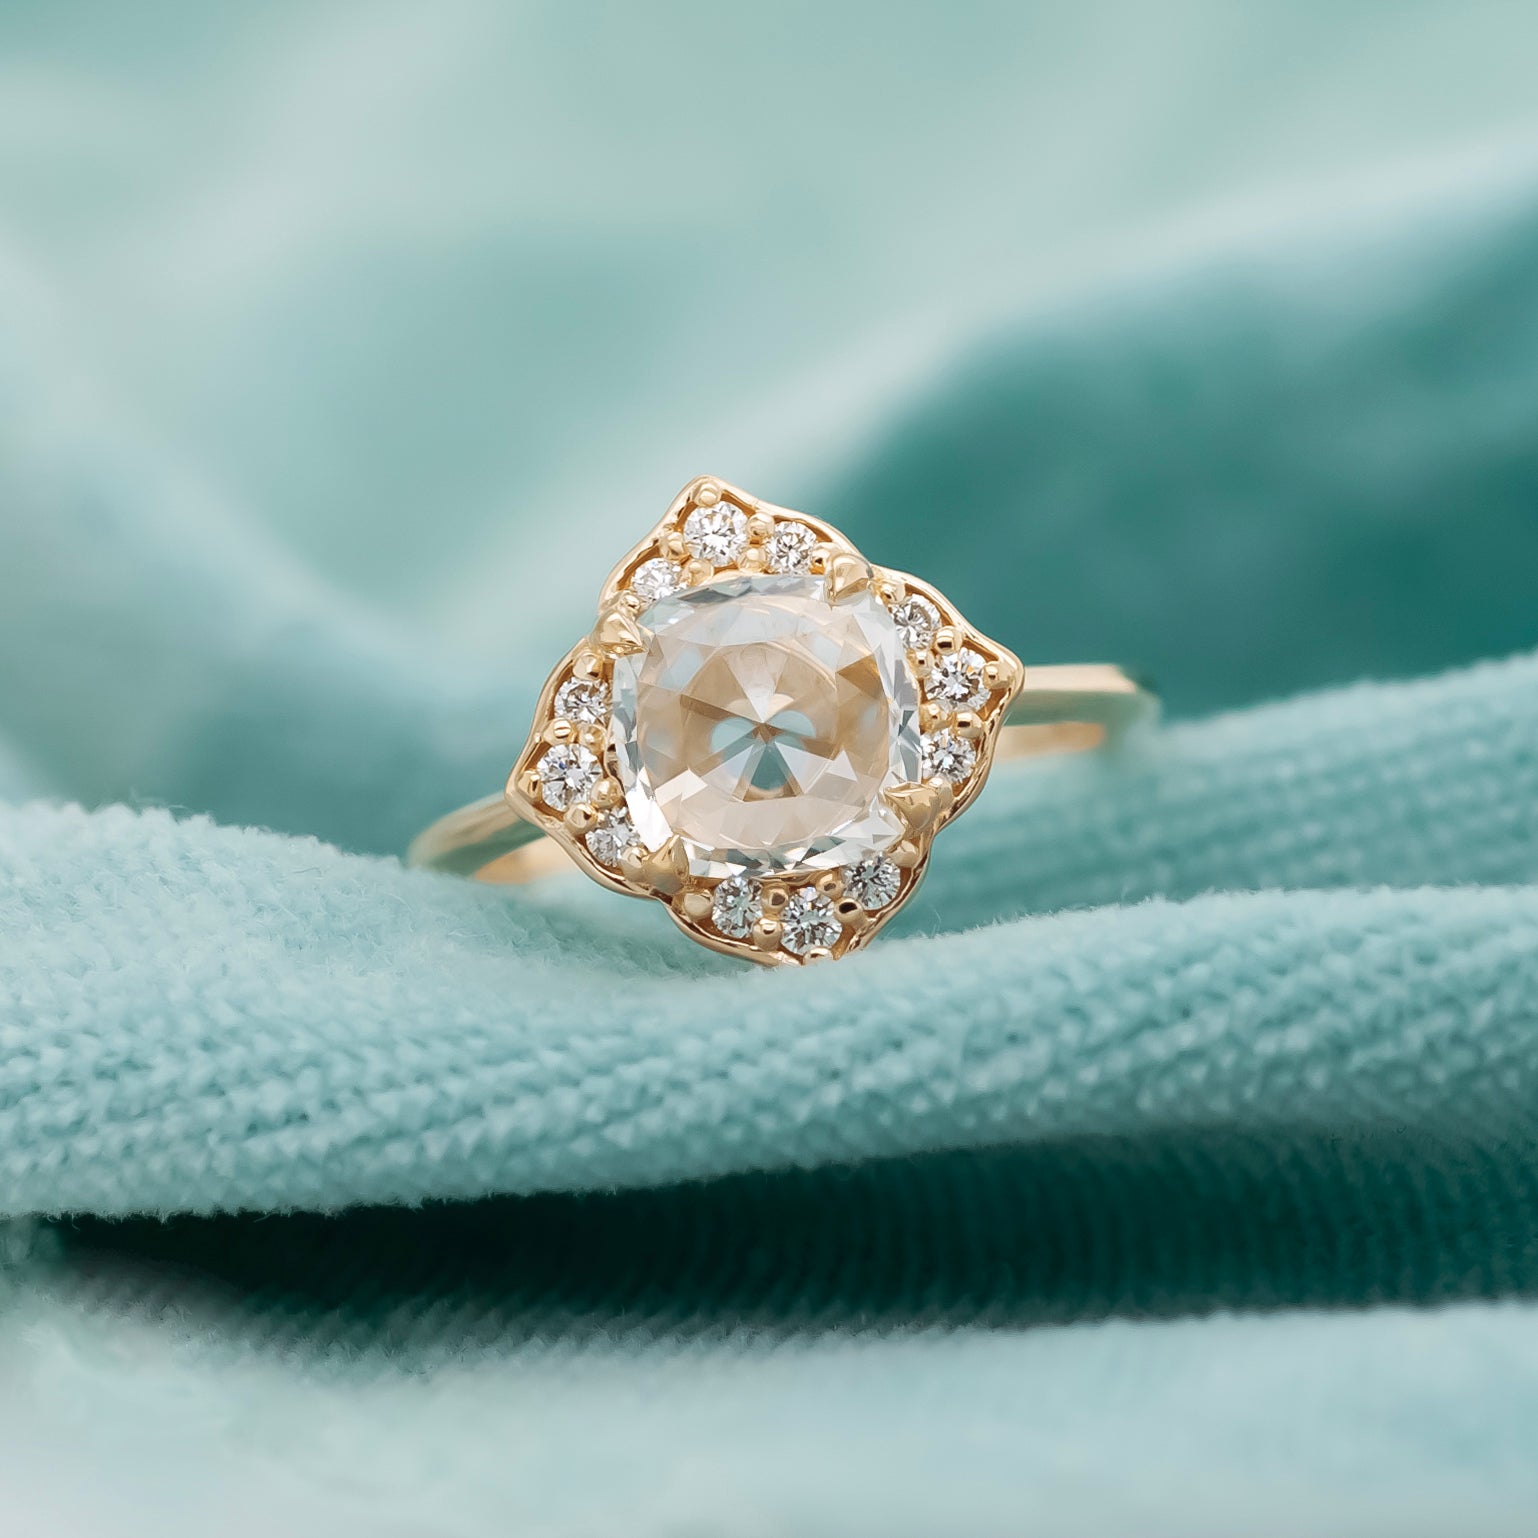 The Maeve Ring